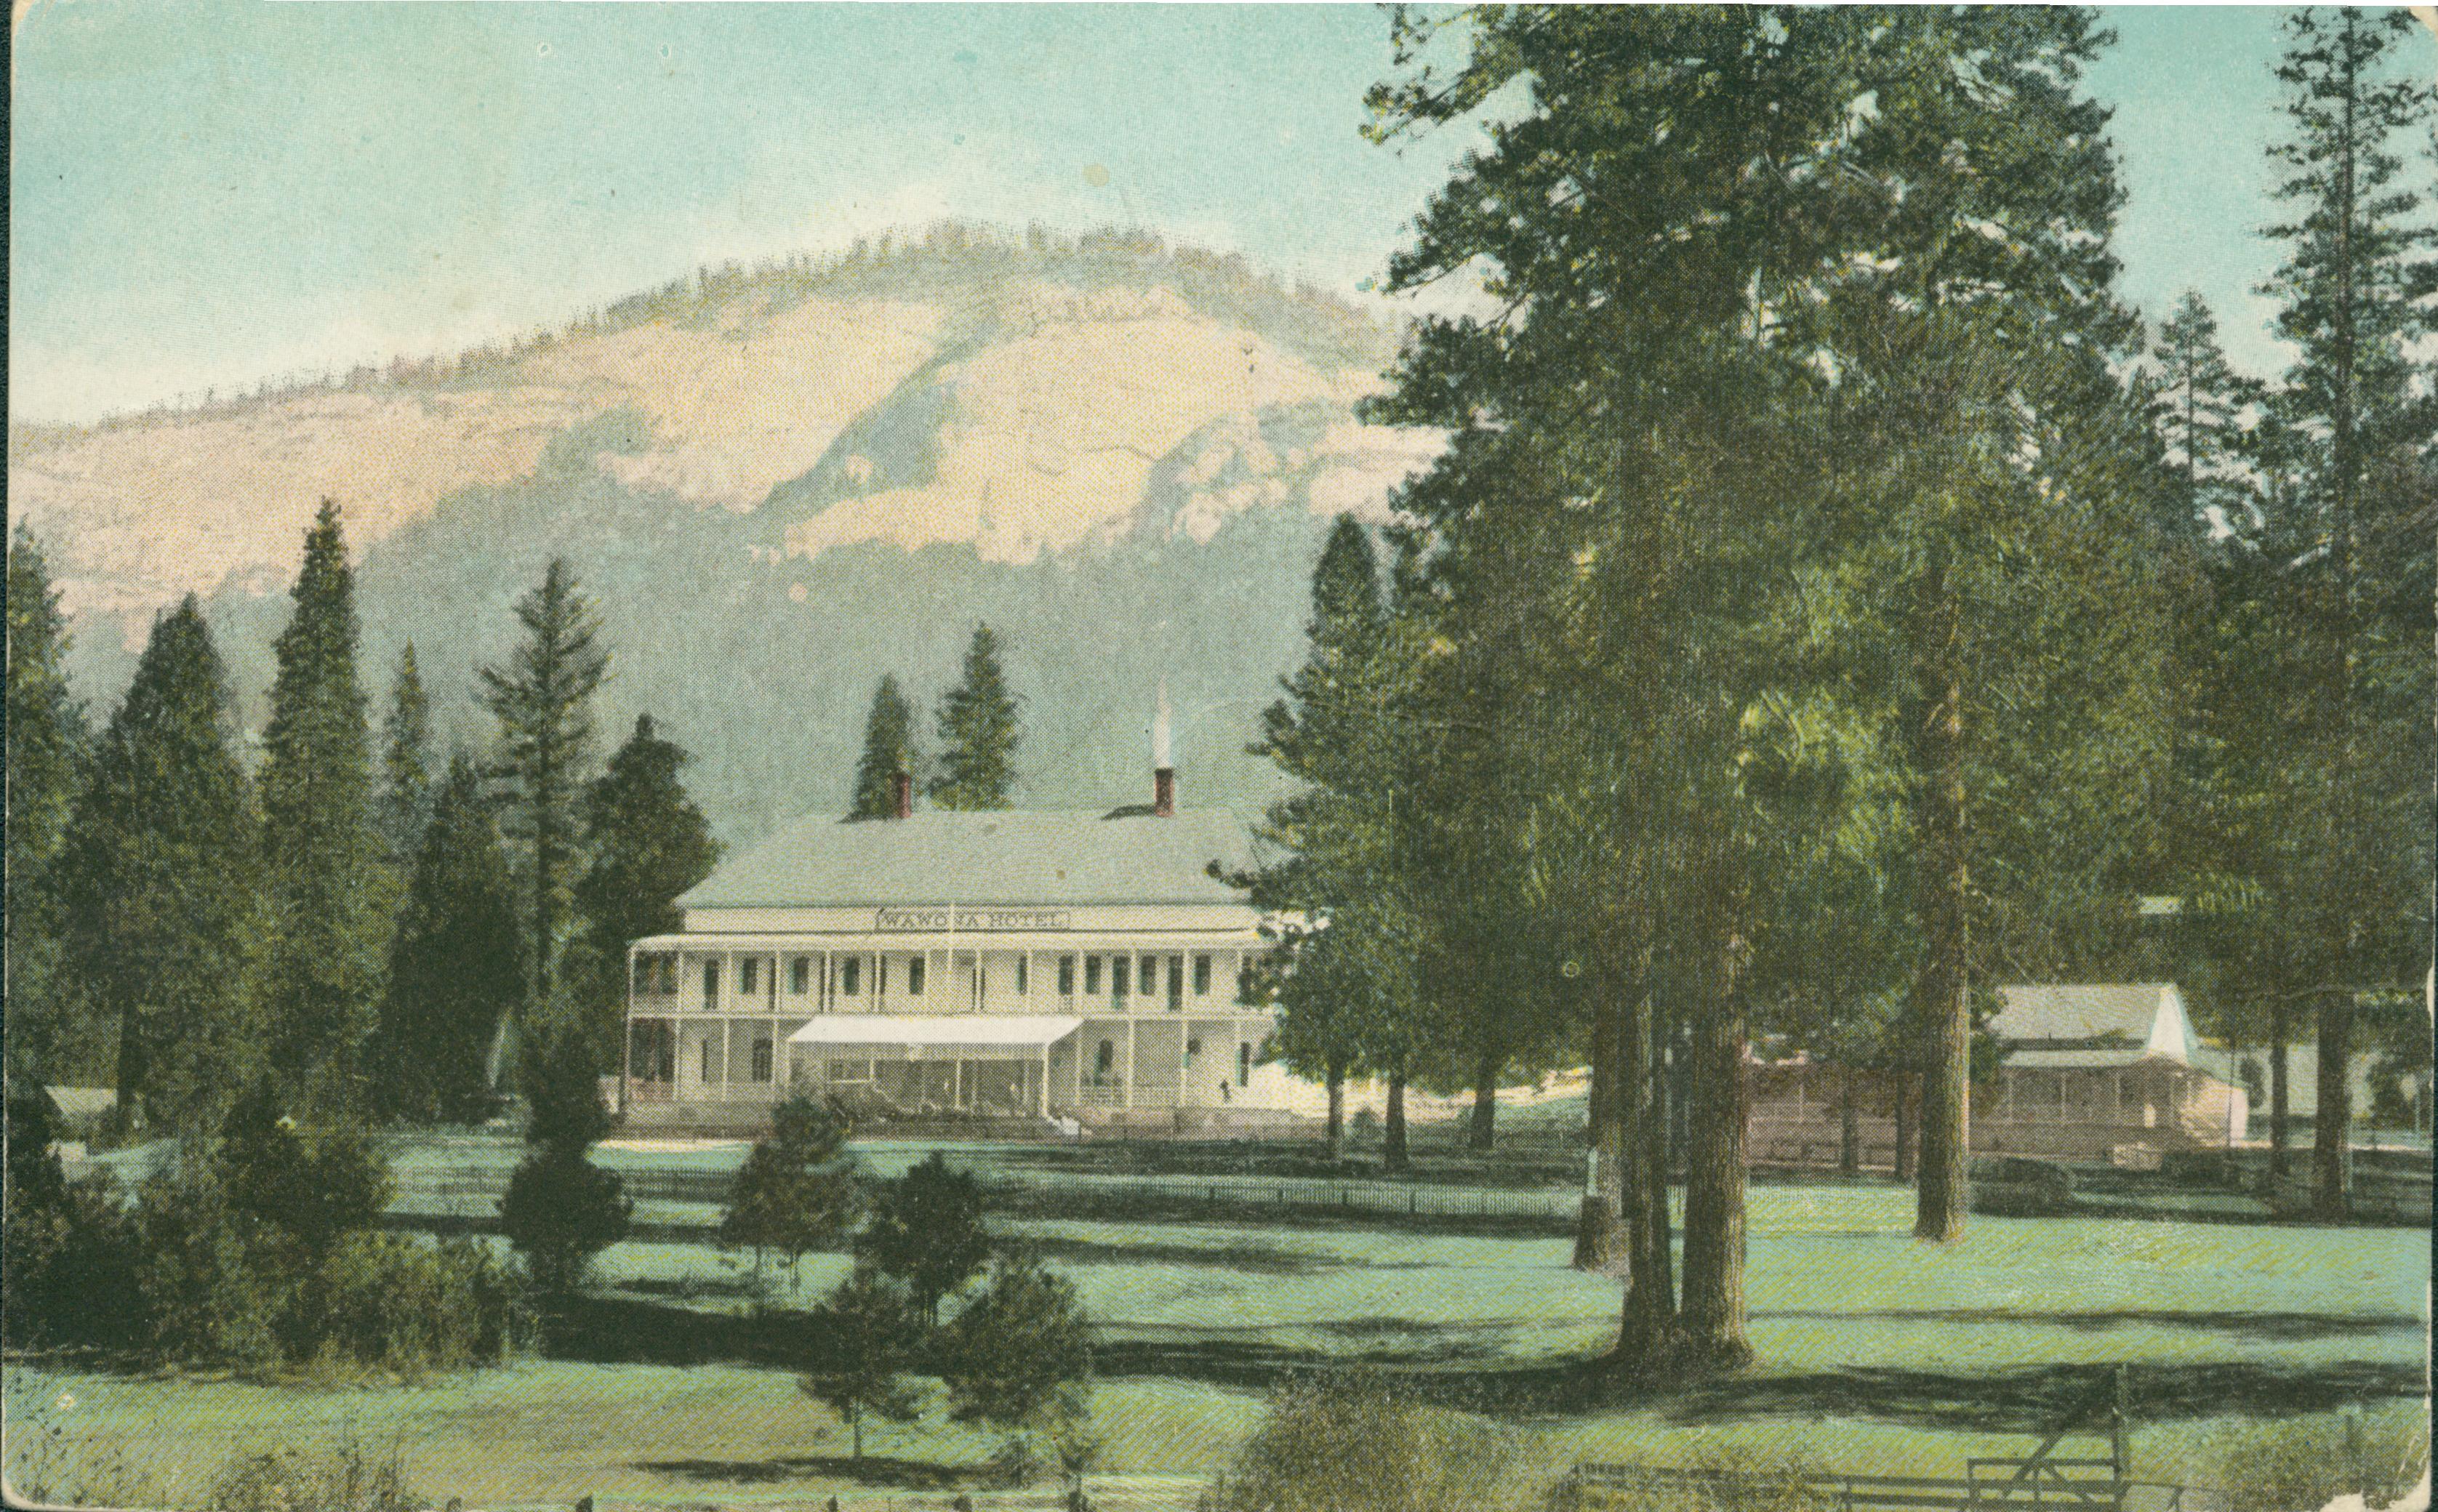 Shows a meadow dotted with trees, with Wawona Hotel in the background